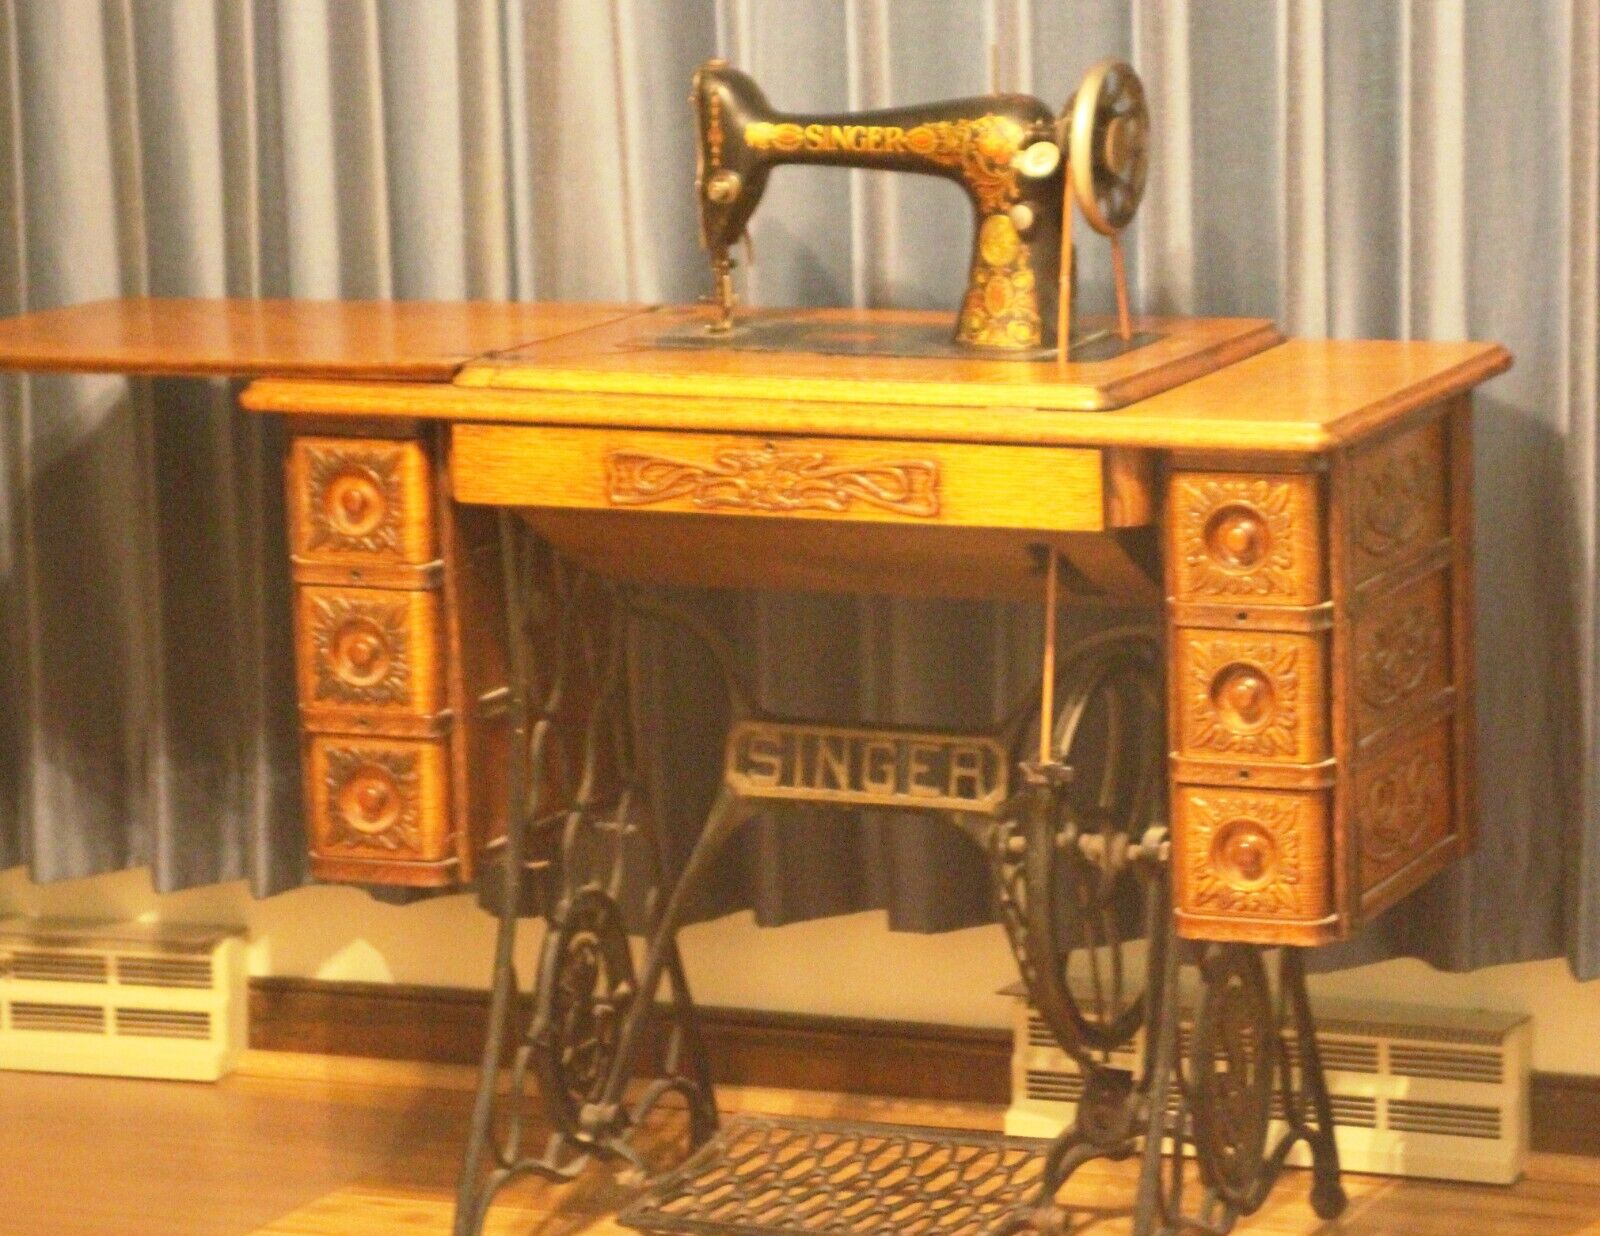 Antique Singer Sewing Machine With Oak Cabinet model 66 Serial # G9748839